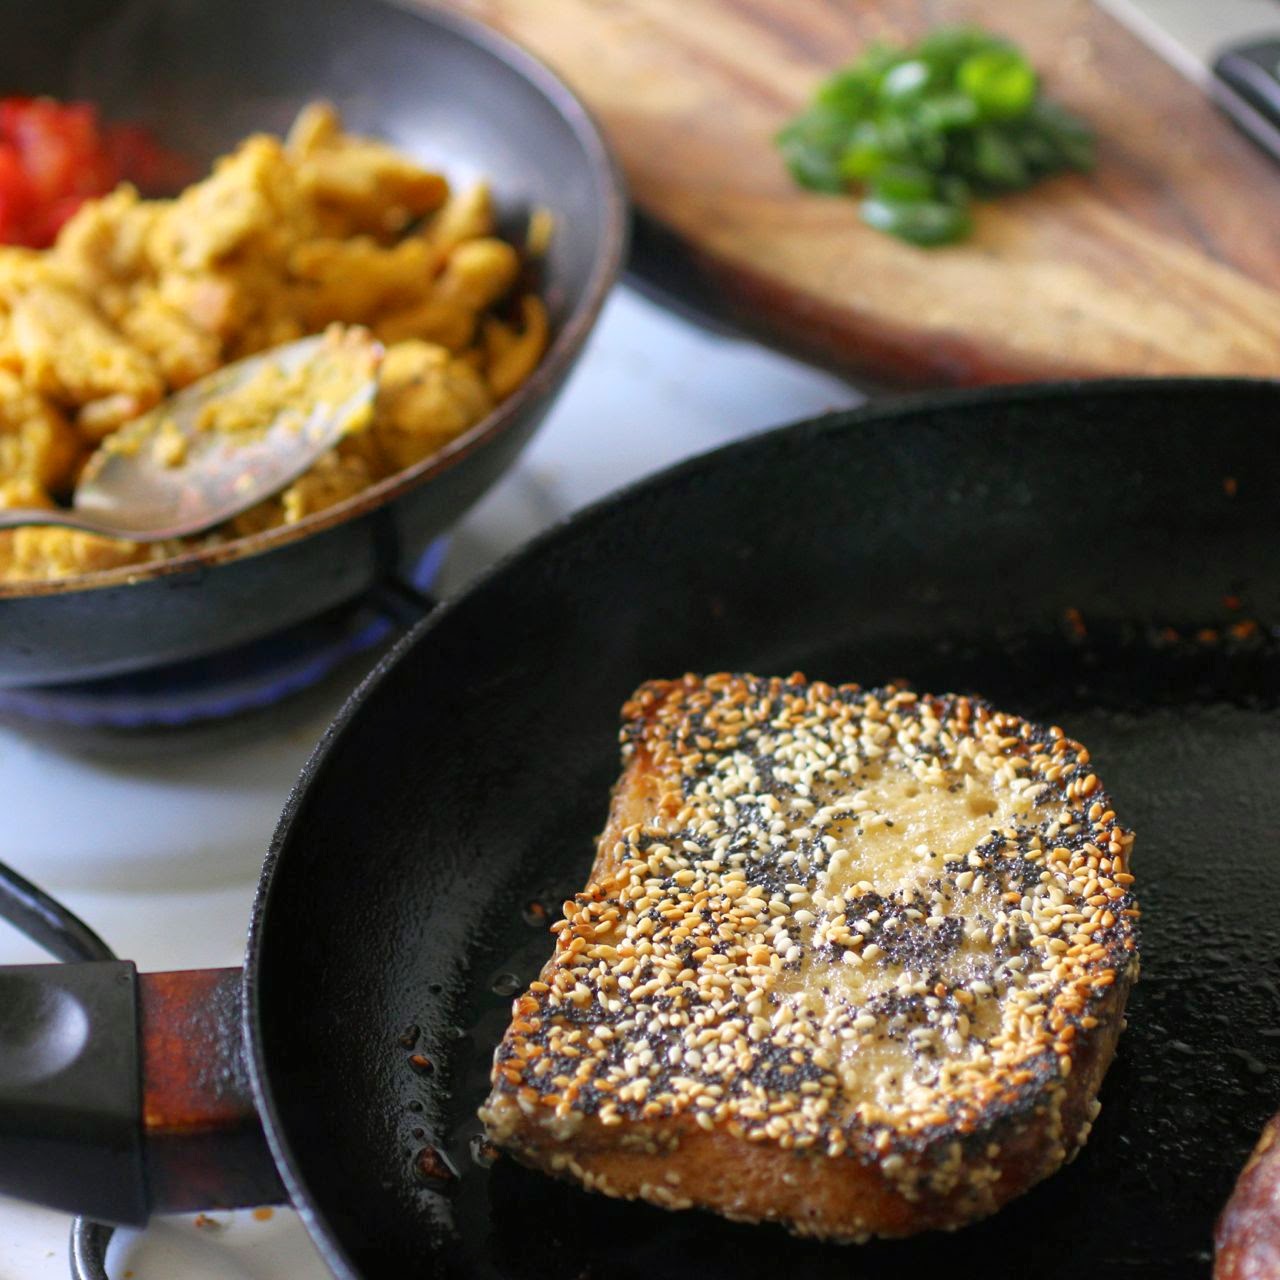 vegan savoury seedy french toast, coconut french toast, and our weekend